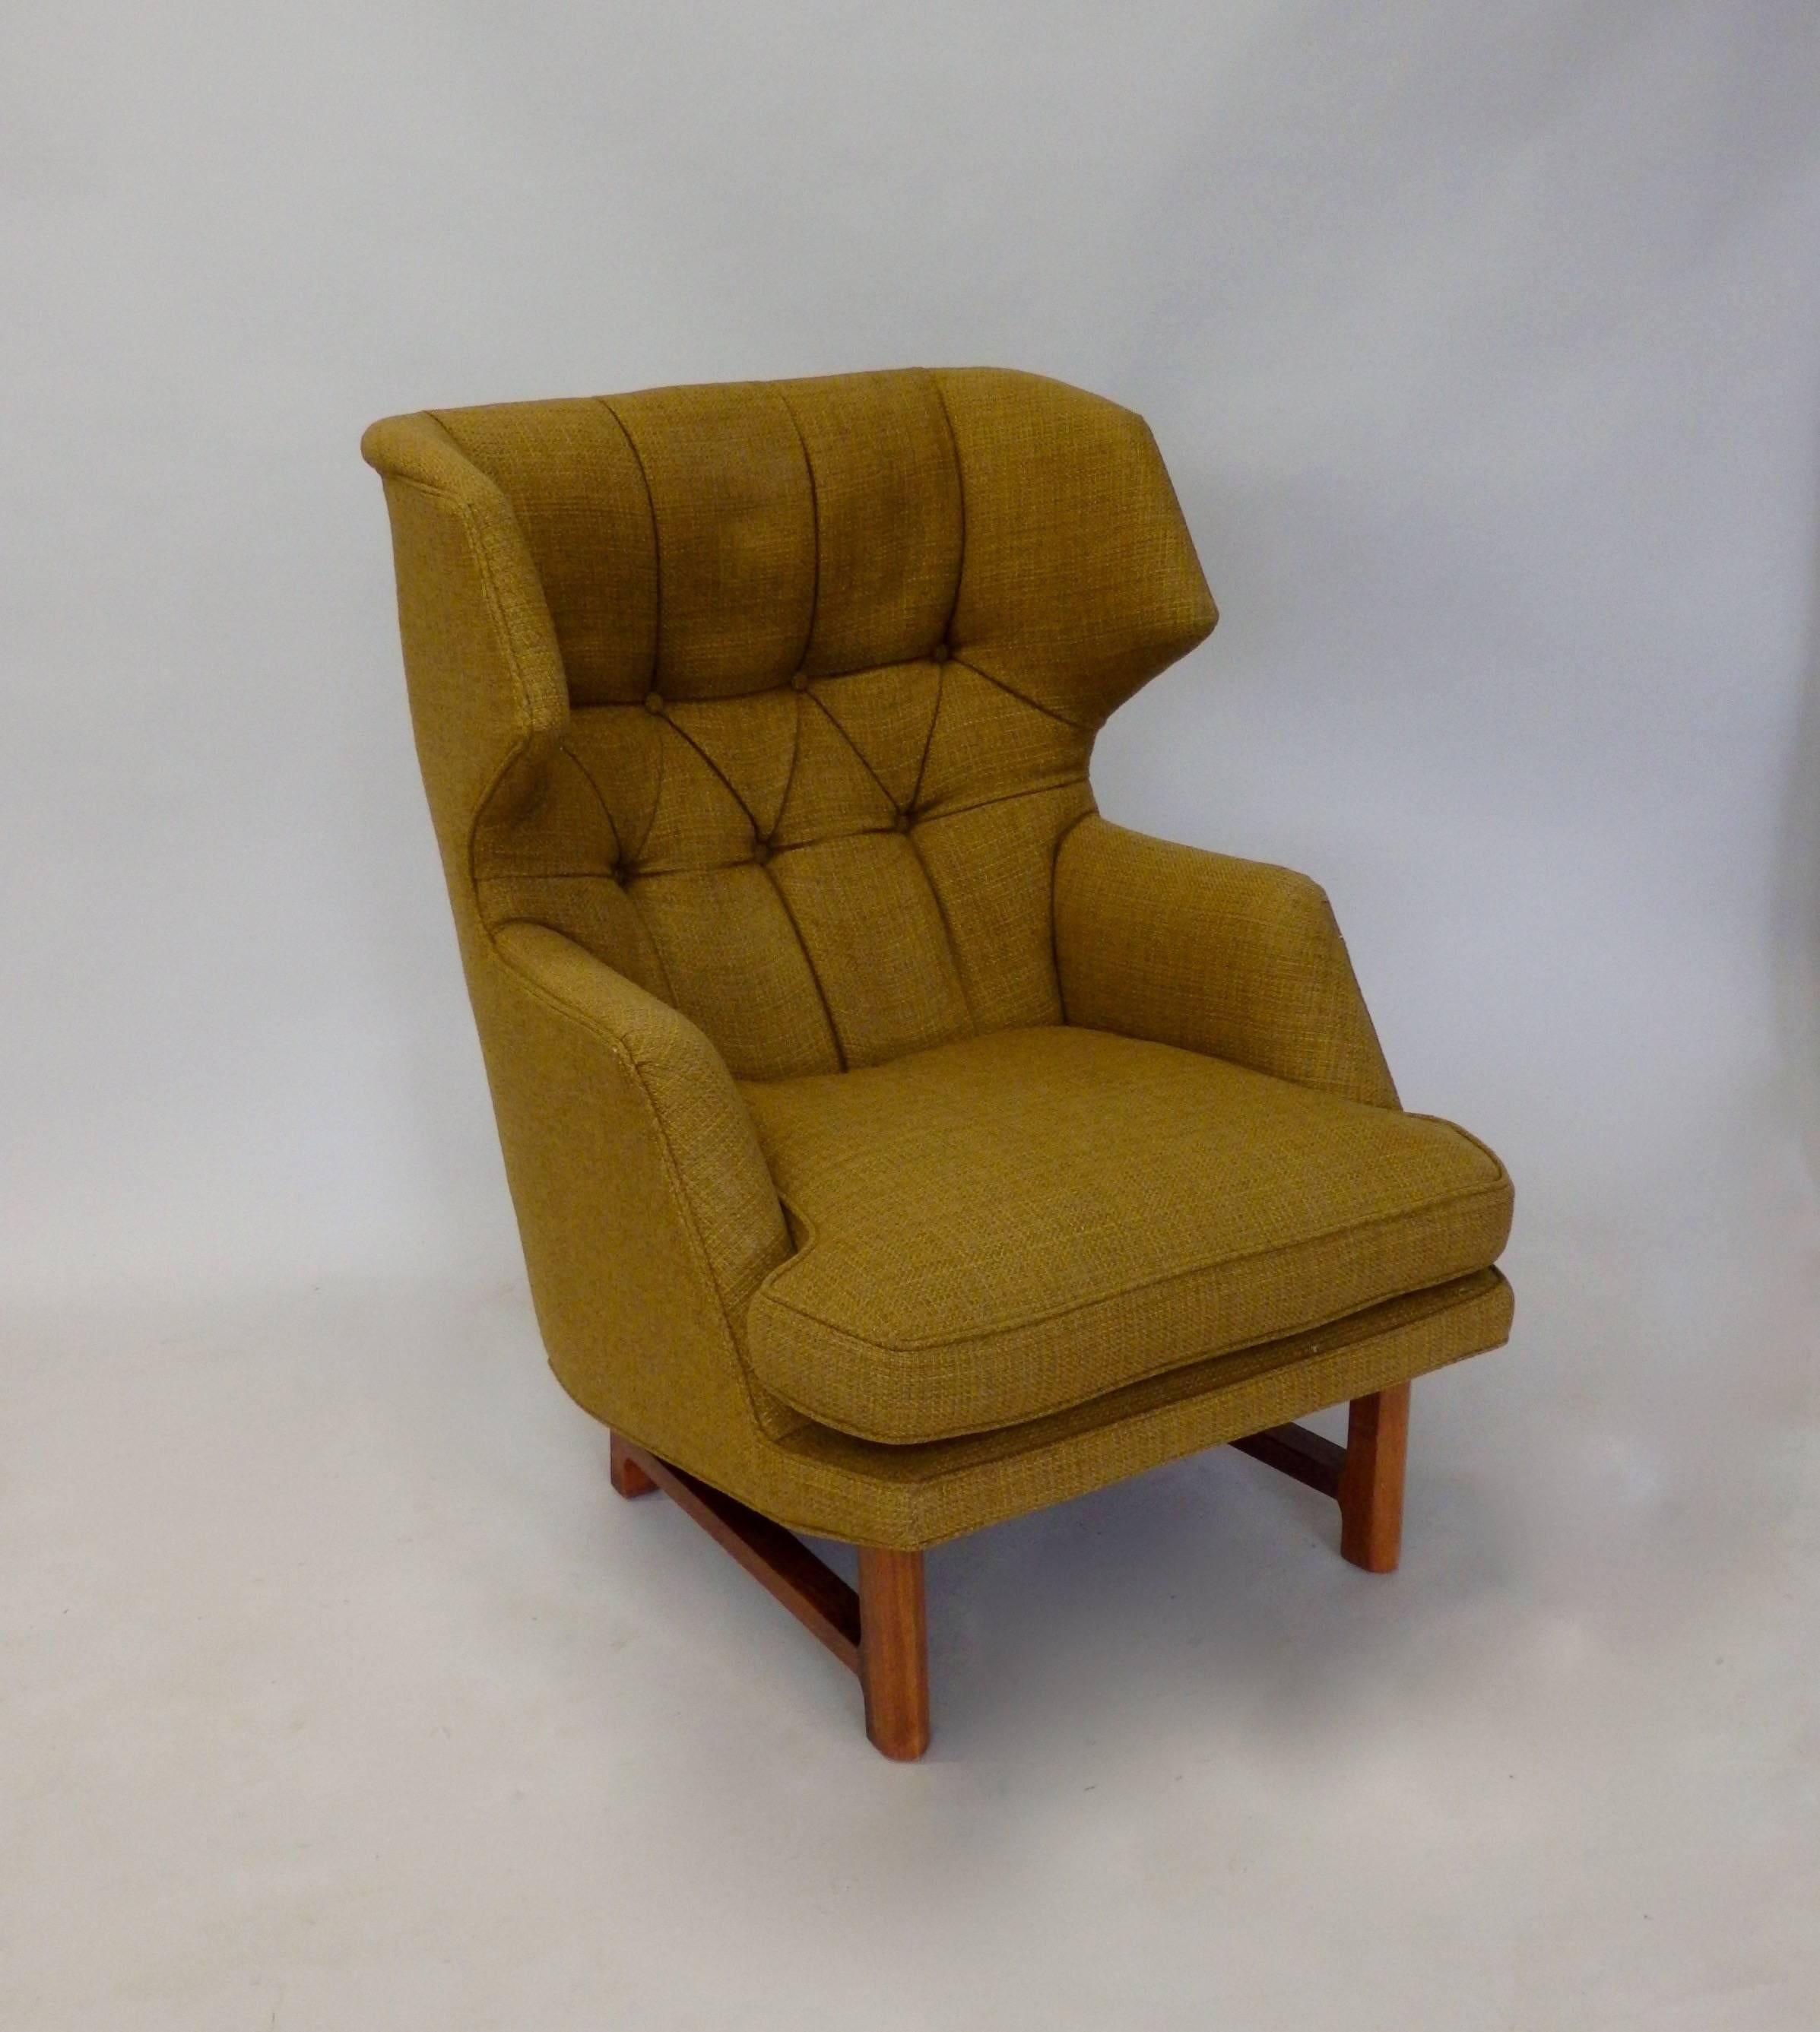 Mid-20th Century Edward Wormley for Dunbar Modernist Janus collection Wingback Lounge Chair